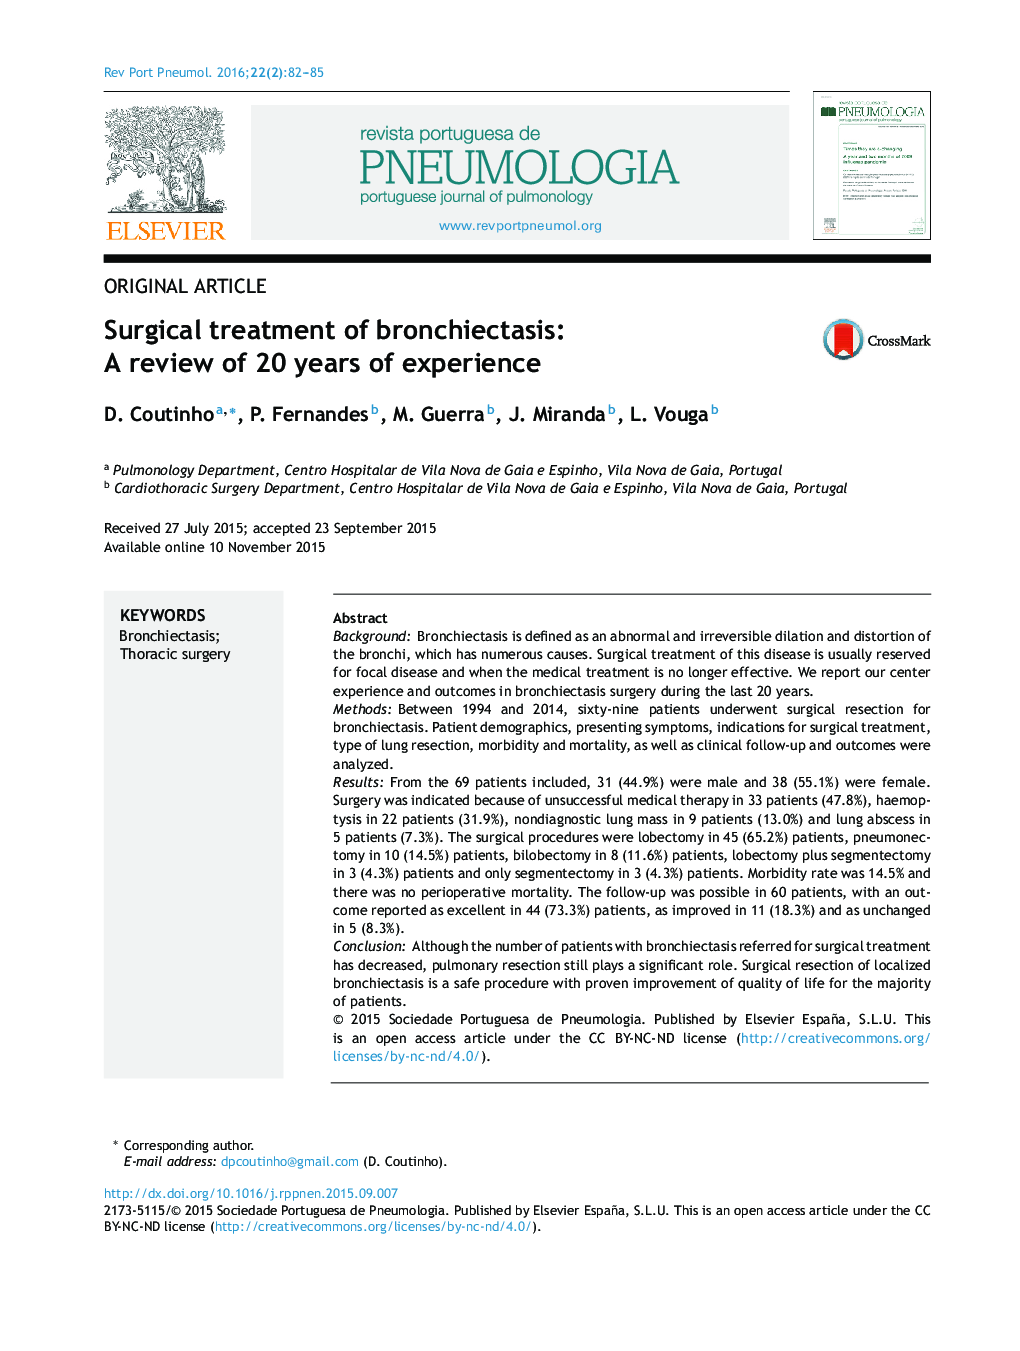 Surgical treatment of bronchiectasis: A review of 20 years of experience